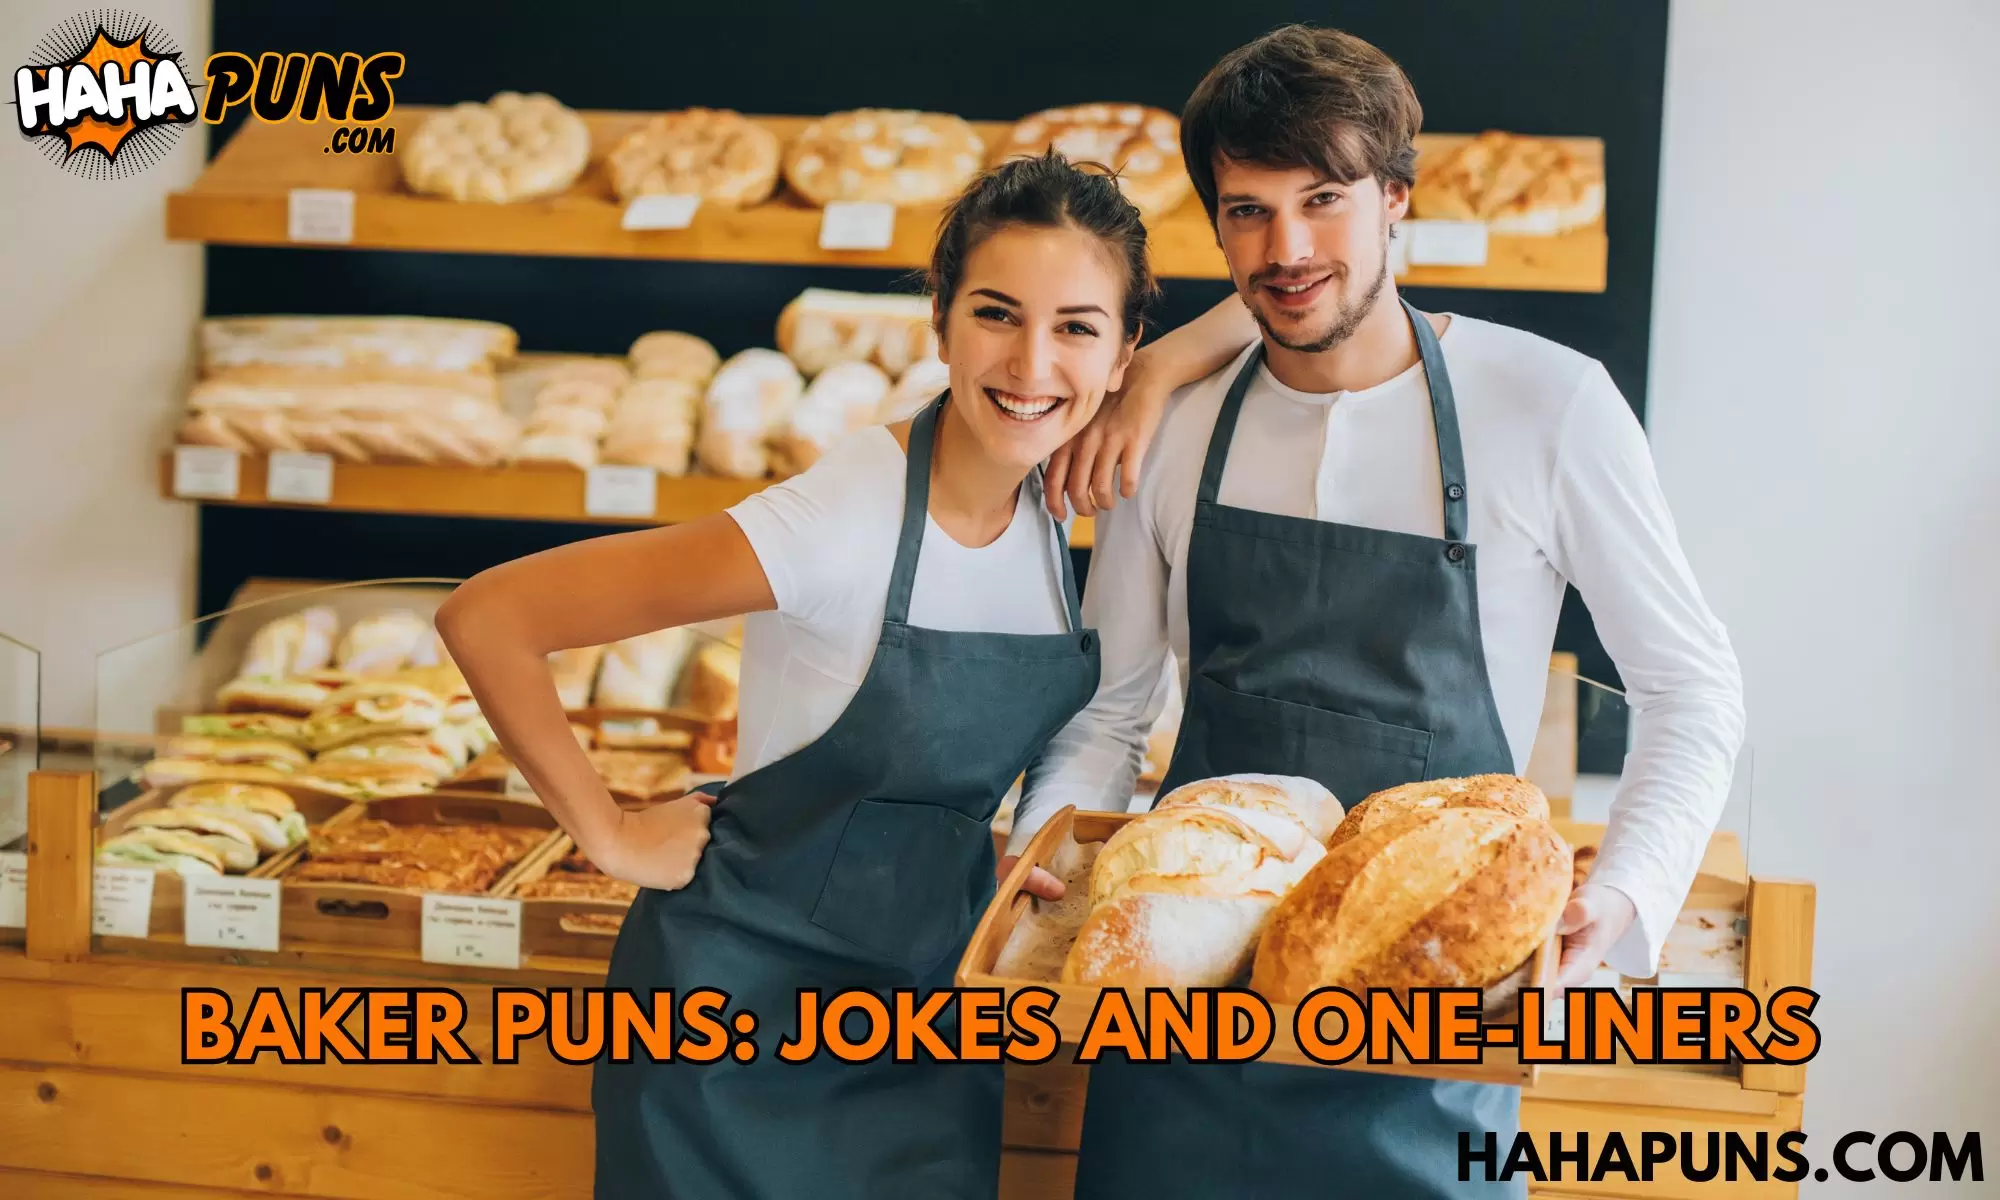 Baker Puns: Jokes And One-Liners